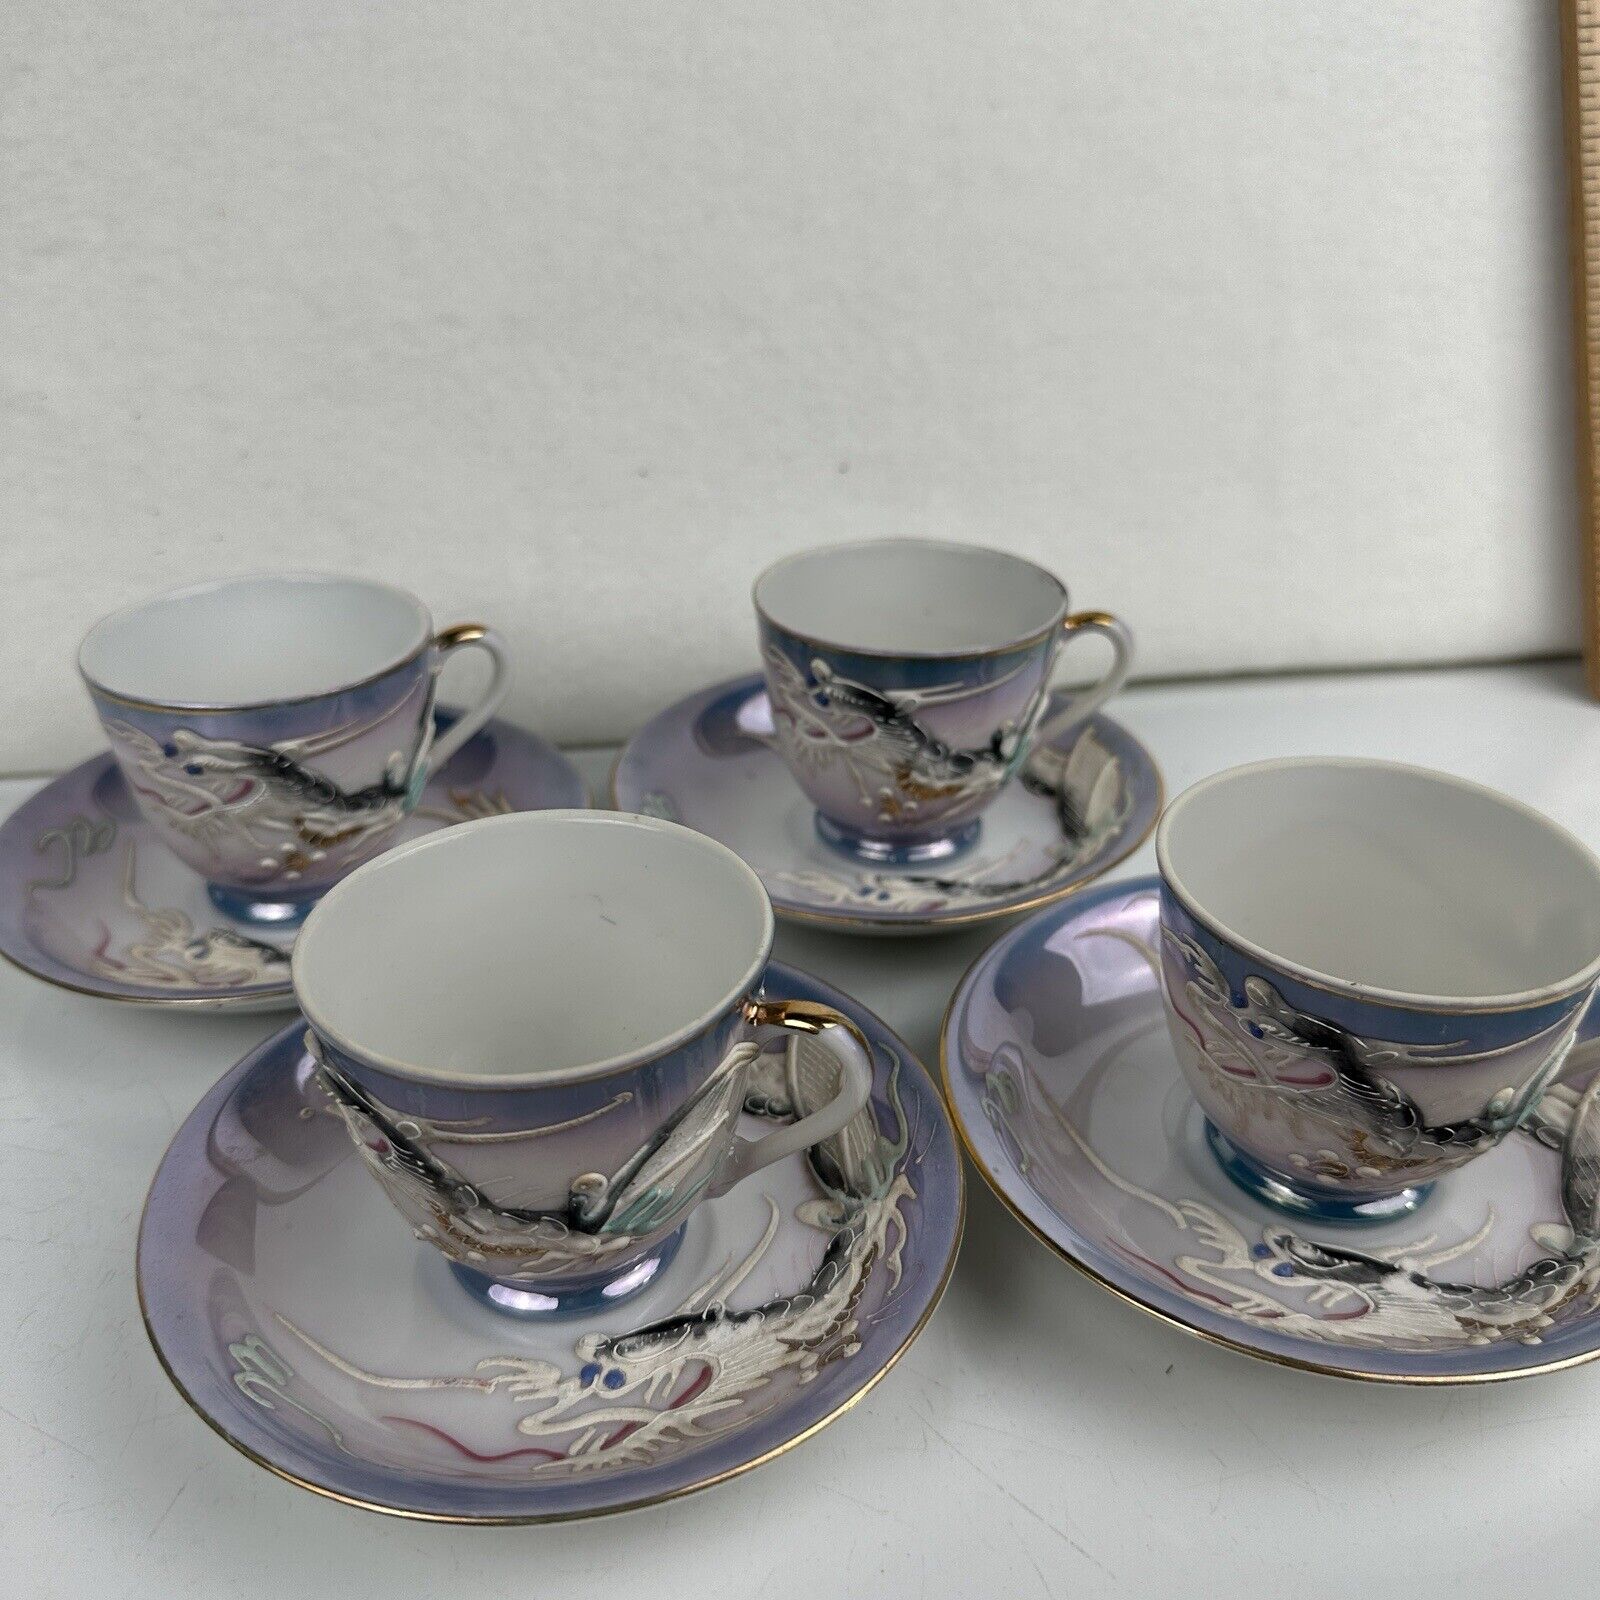 Dragon Ware BLUE Eyed Dragon Moriage Style Tea Cup & Saucer Set of 4 - 8 Pieces